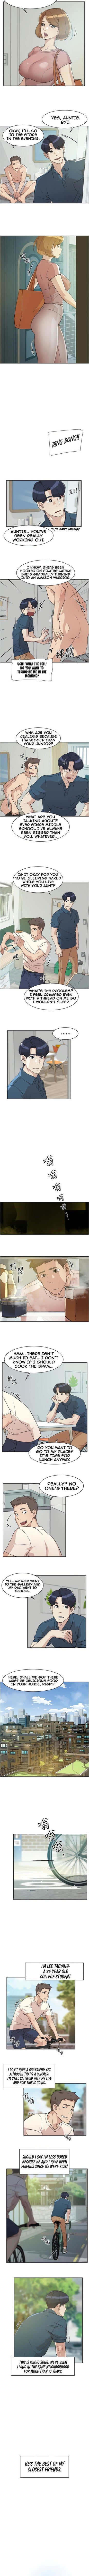 Shemale Everything about Best Friend Manhwa 01-13 Gaycum - Page 3